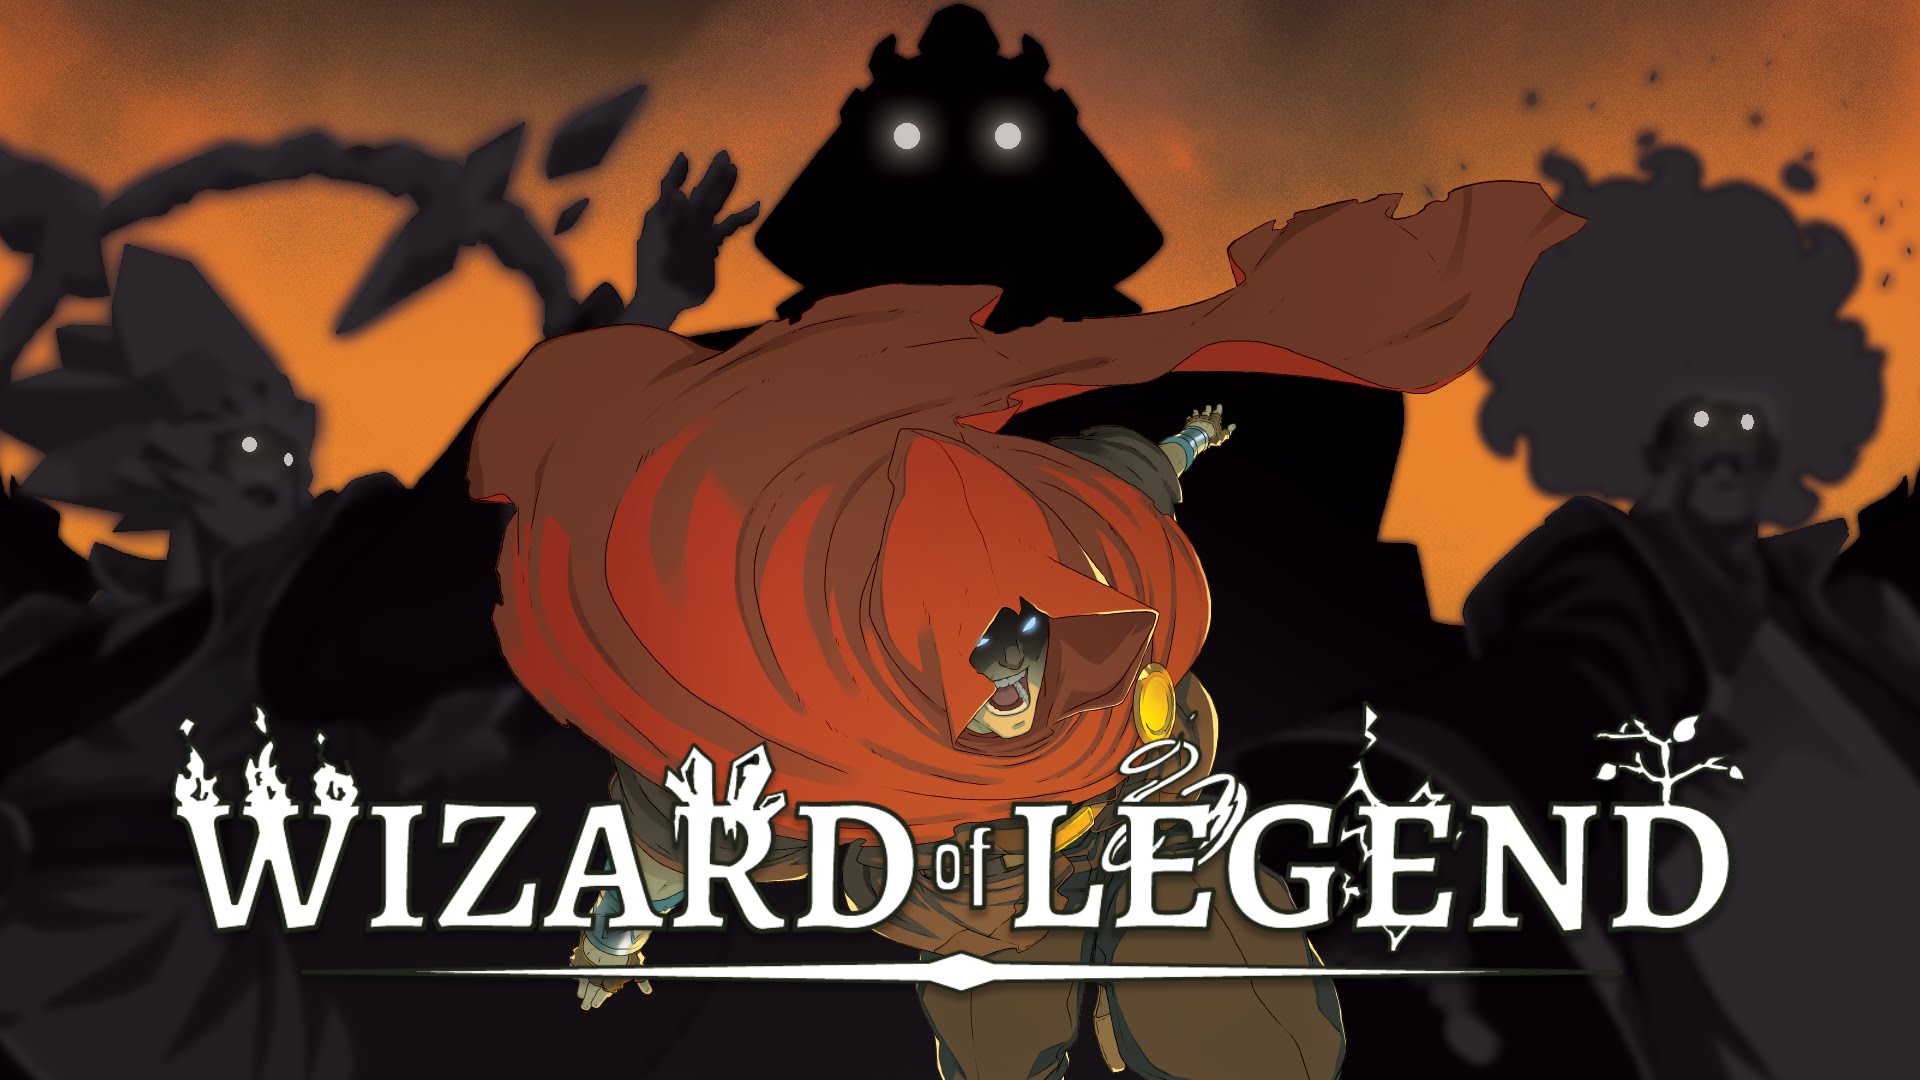 Video Game Wizard of Legend HD Wallpaper | Background Image